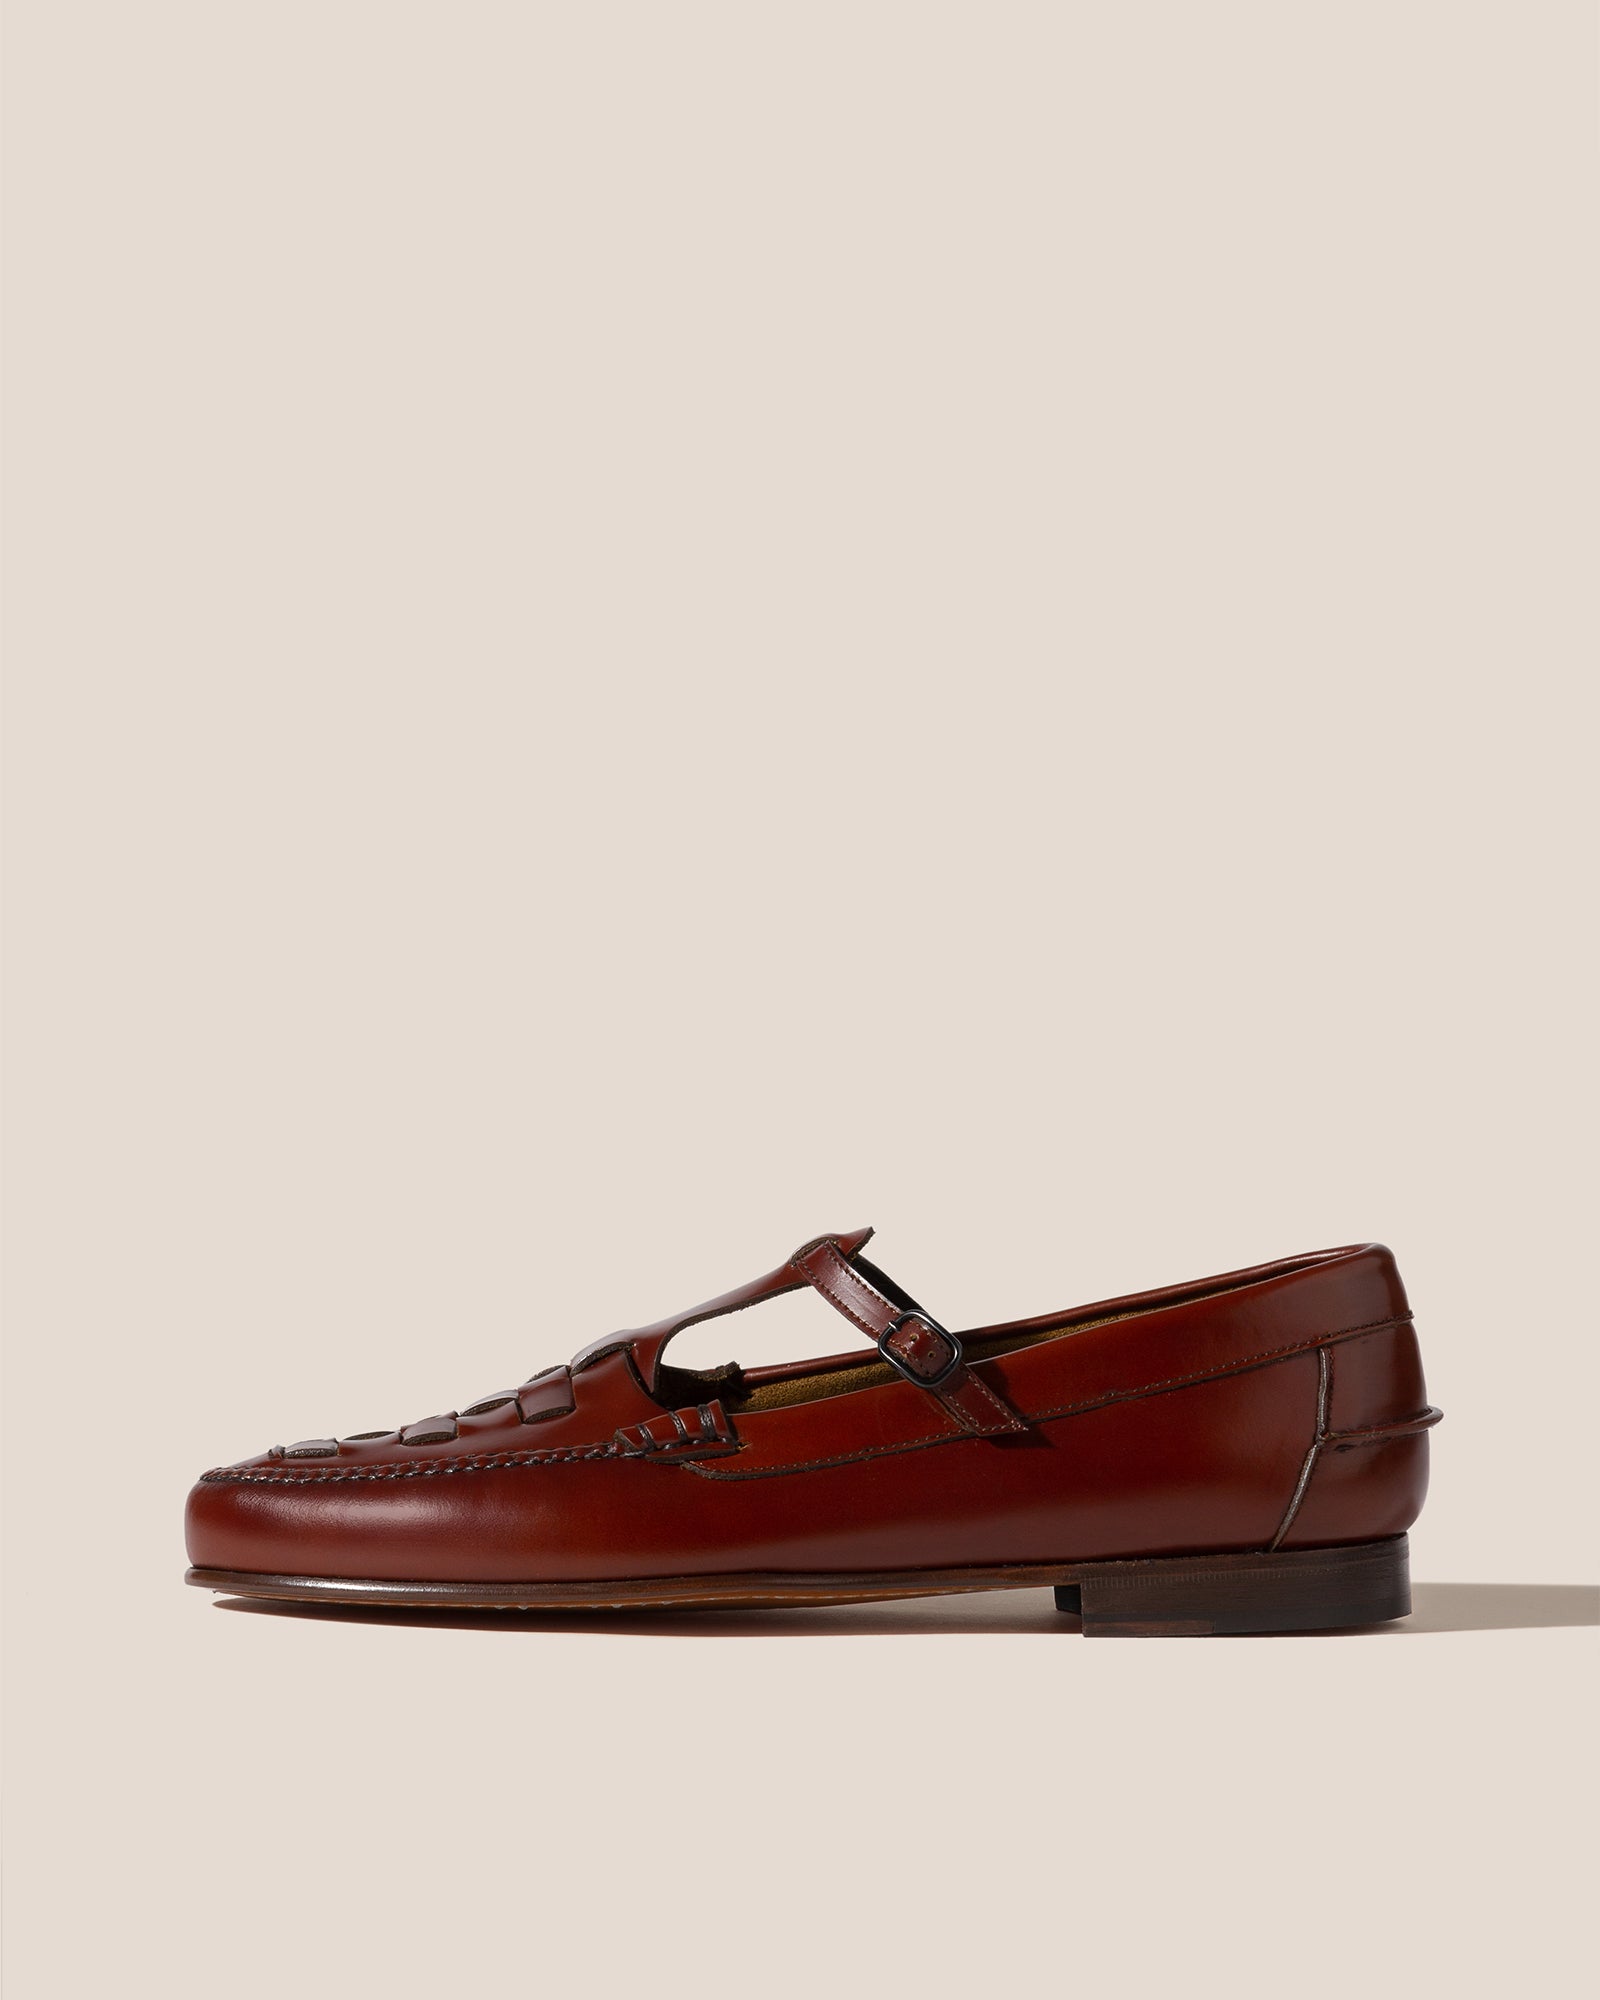 15mm Maqueda Leather Loafers